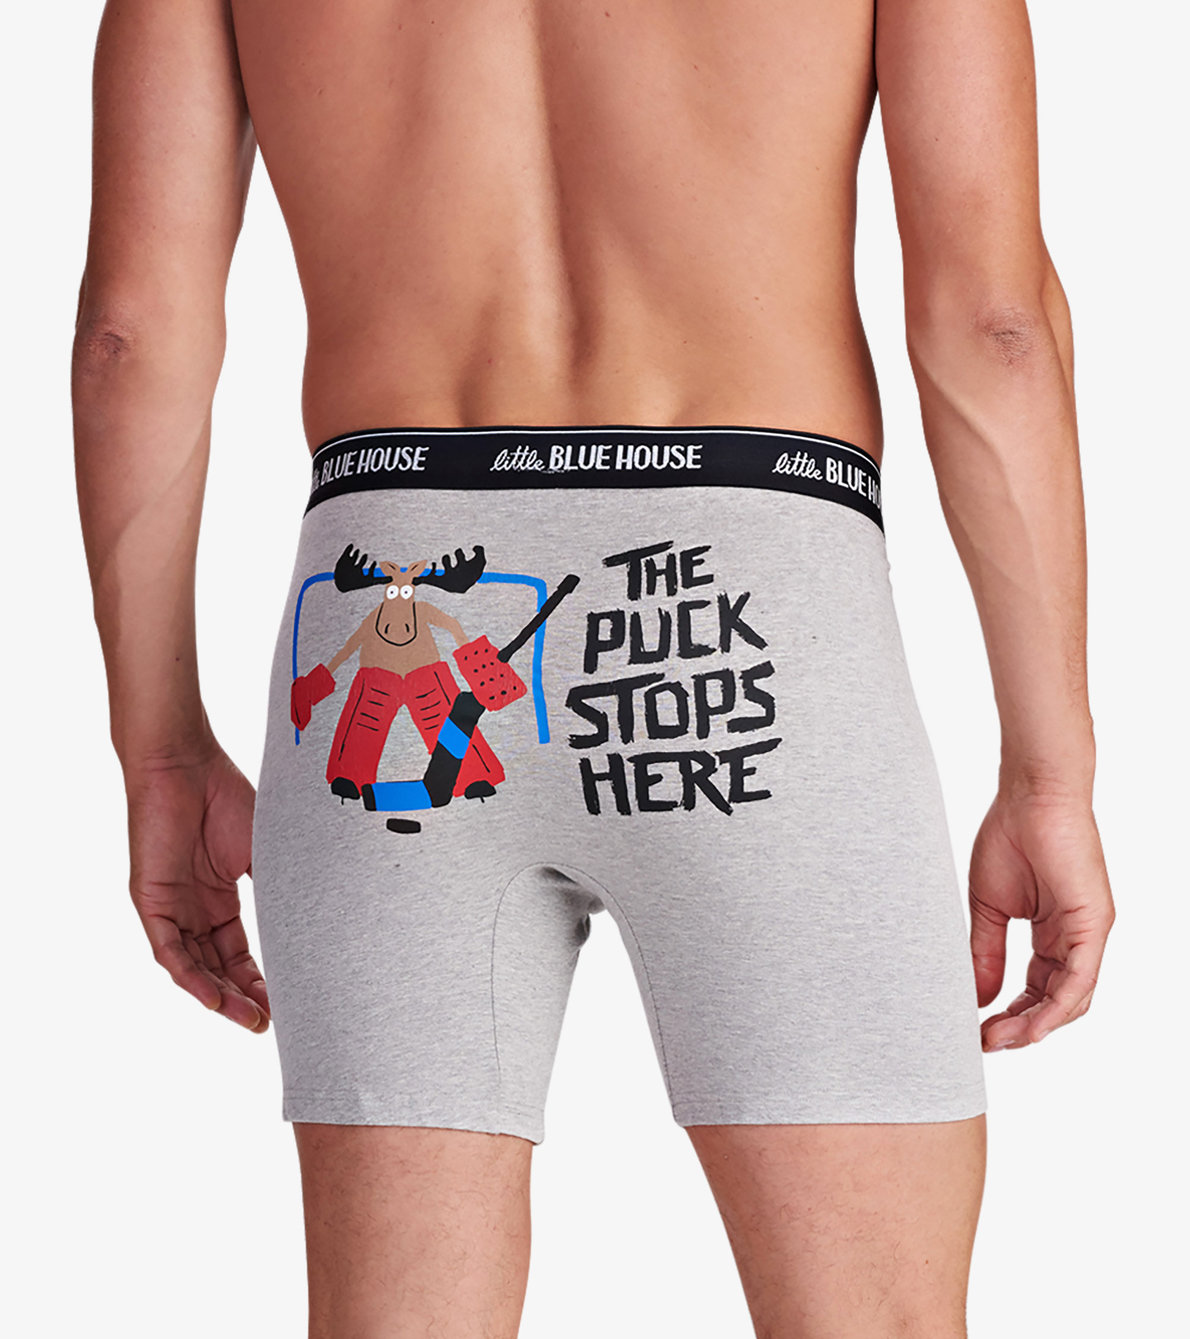 View larger image of The Puck Stops Here Men's Boxer Briefs